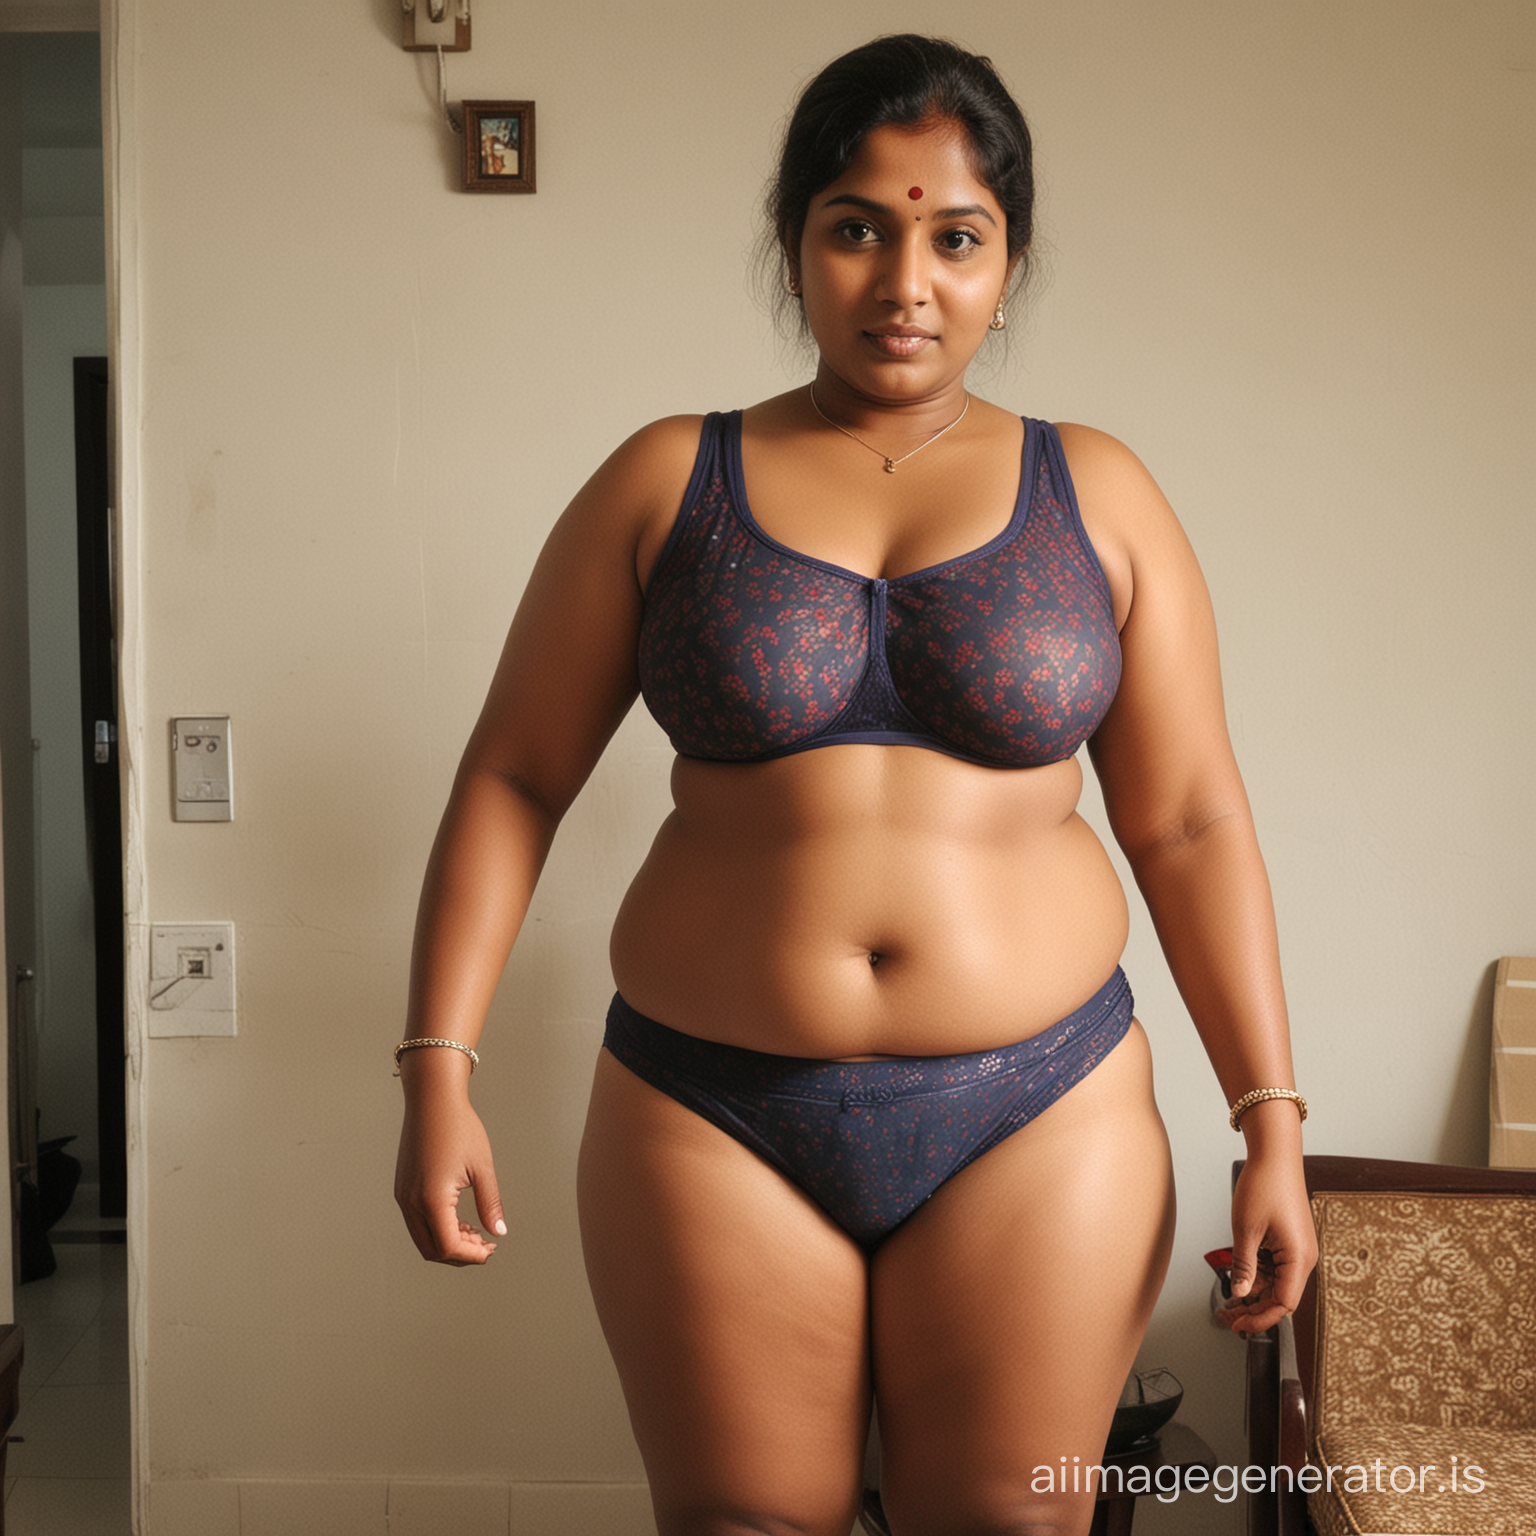 Dark skinned fat chubby south indian aunty wearing underwear Standing with son

